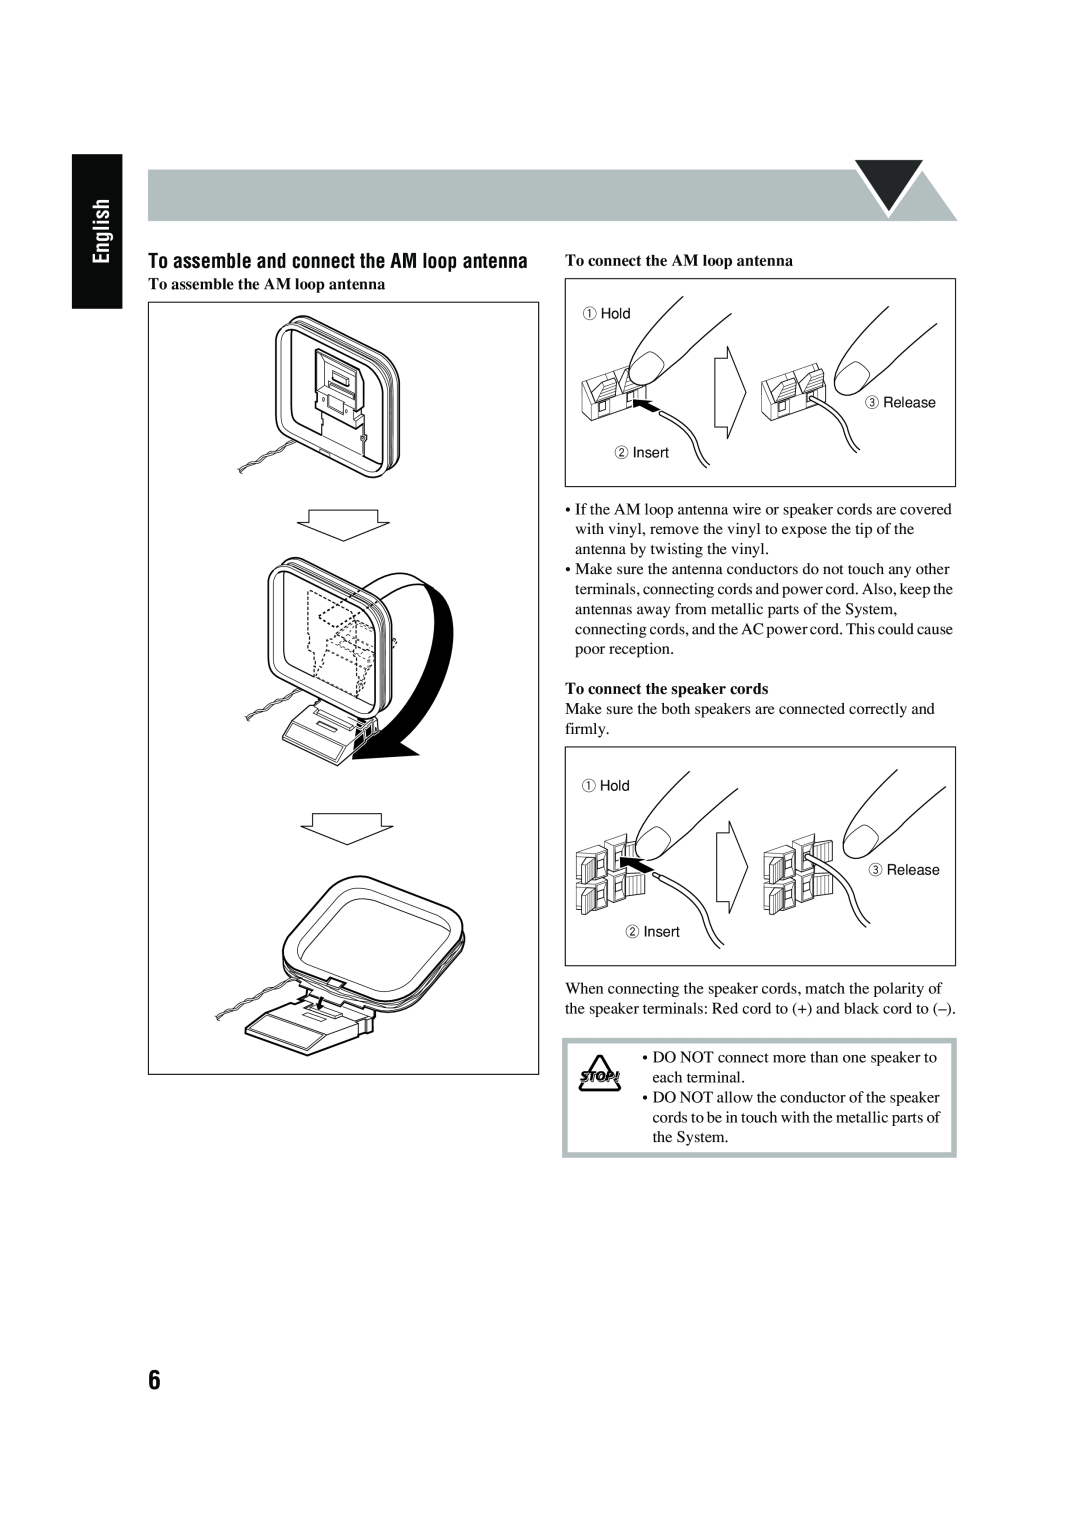 JVC UX-P400 manual English, To assemble and connect the AM loop antenna, To assemble the AM loop antenna 